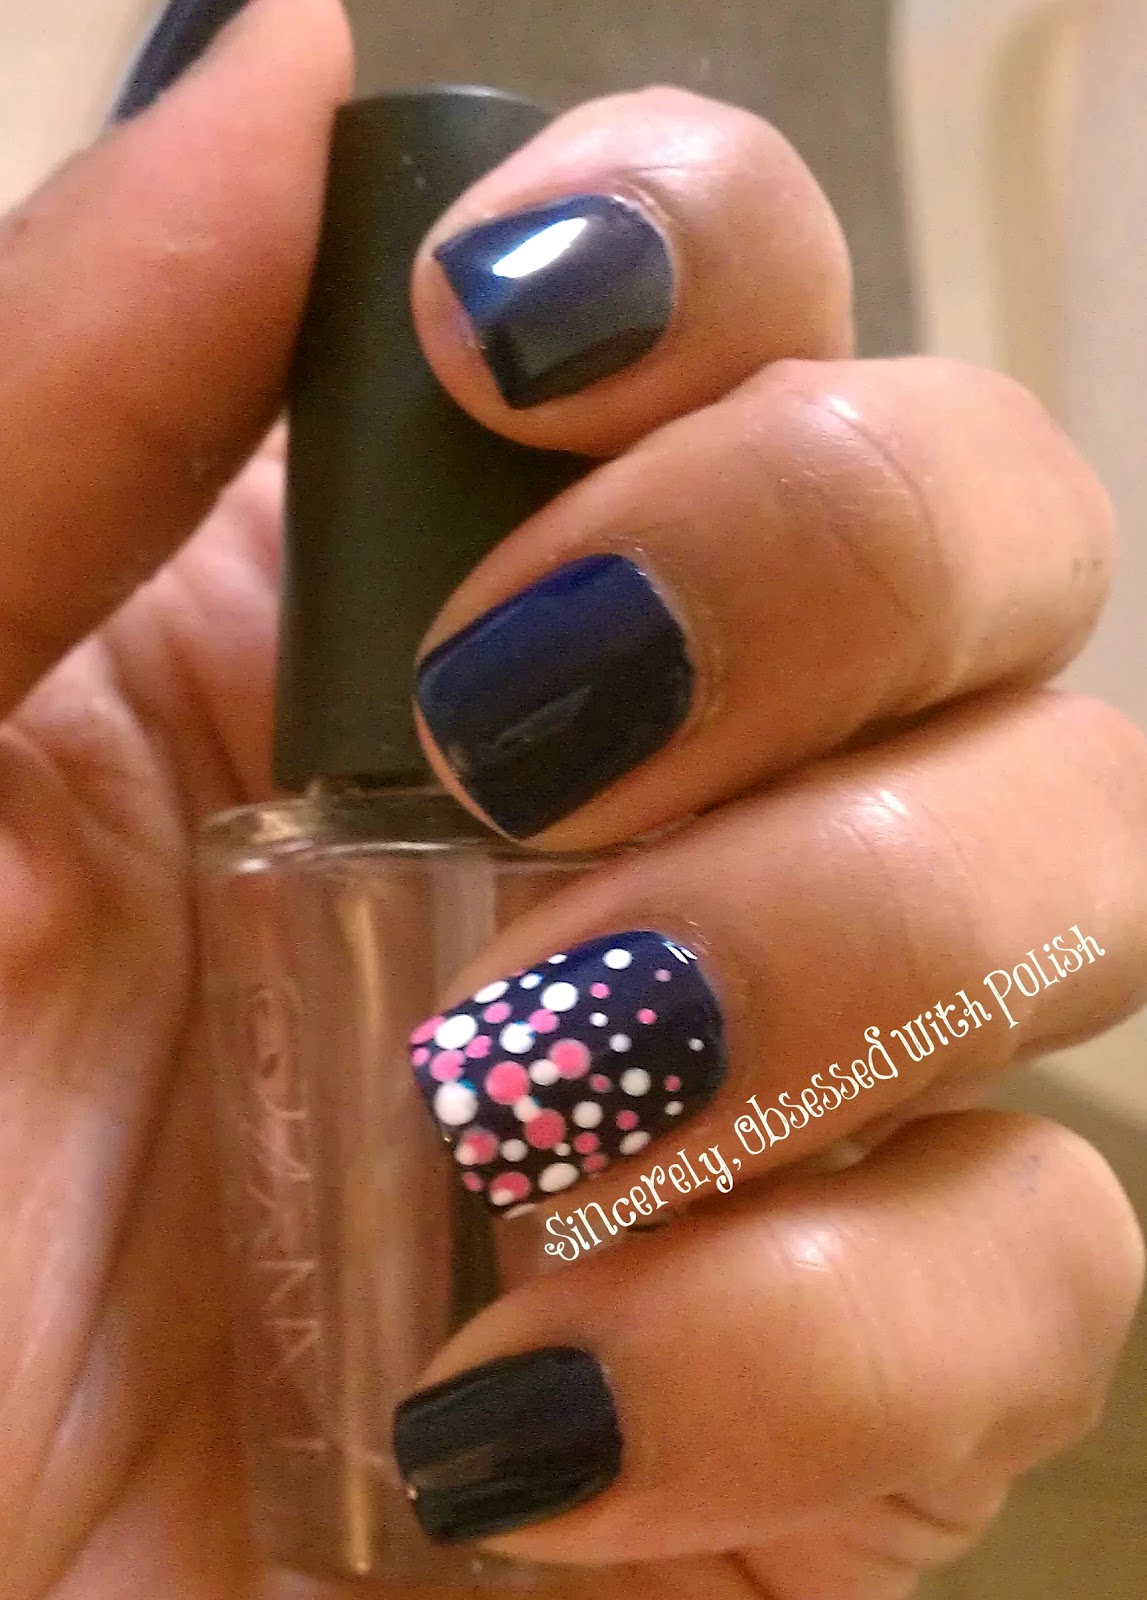 Sincerely, Obsessed With Polish: September 2012